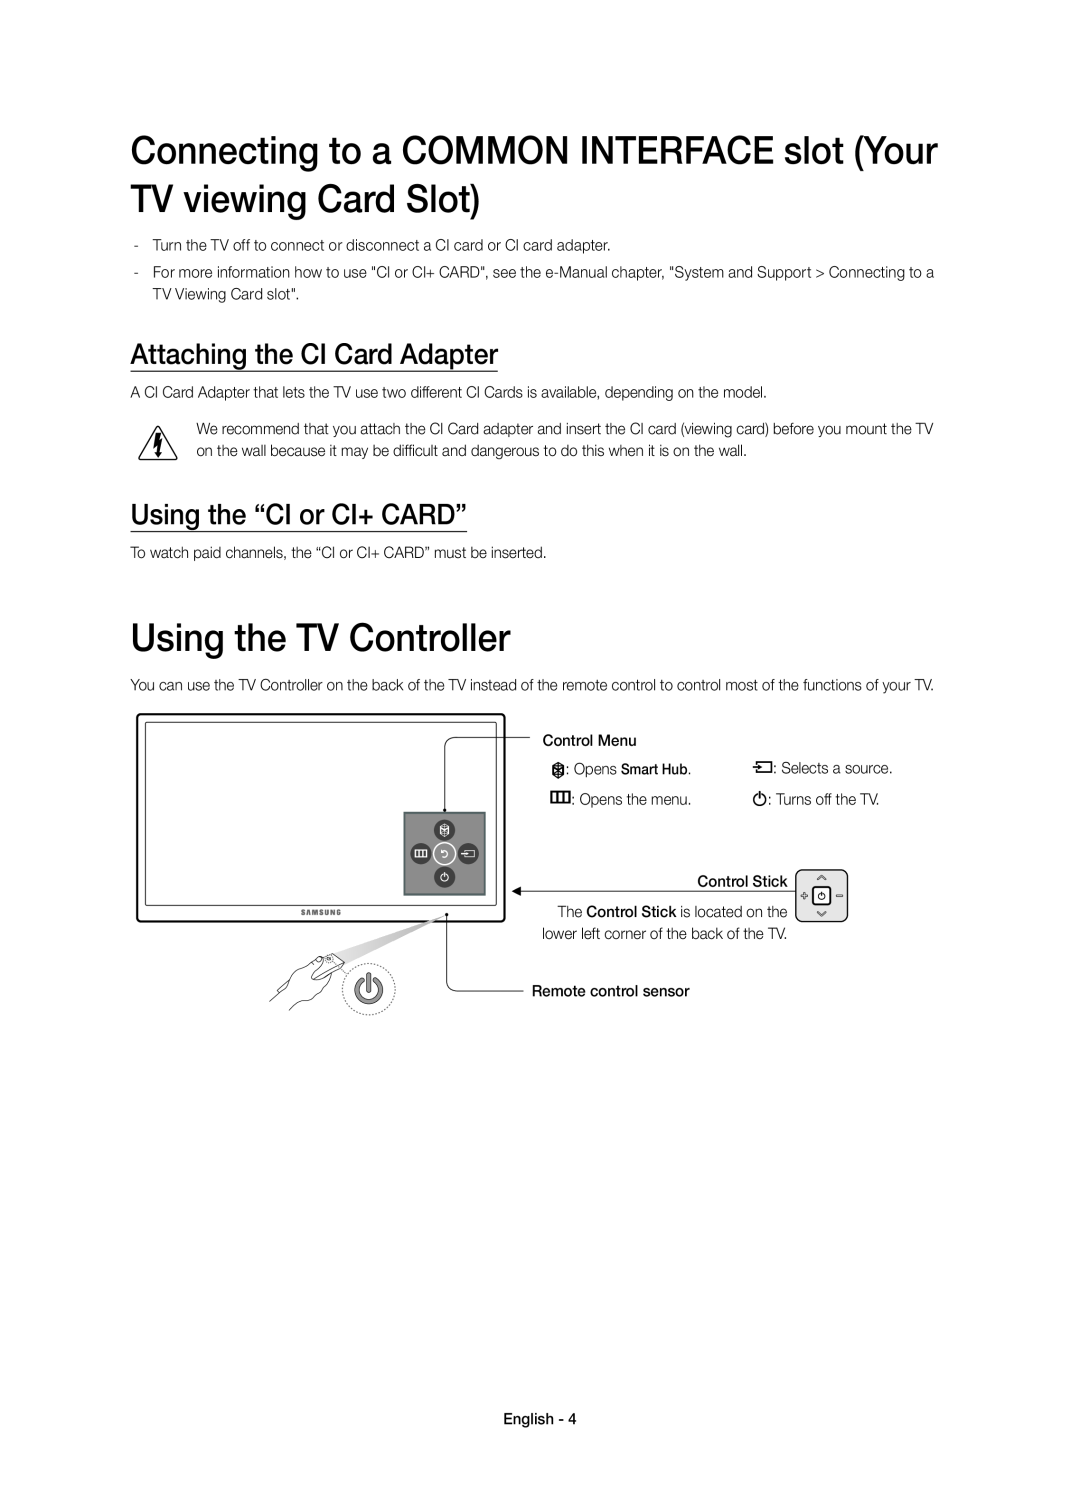 Samsung UE48JU6770UXZG manual Connecting to a COMMON INTERFACE slot Your TV viewing Card Slot, Using the TV Controller 